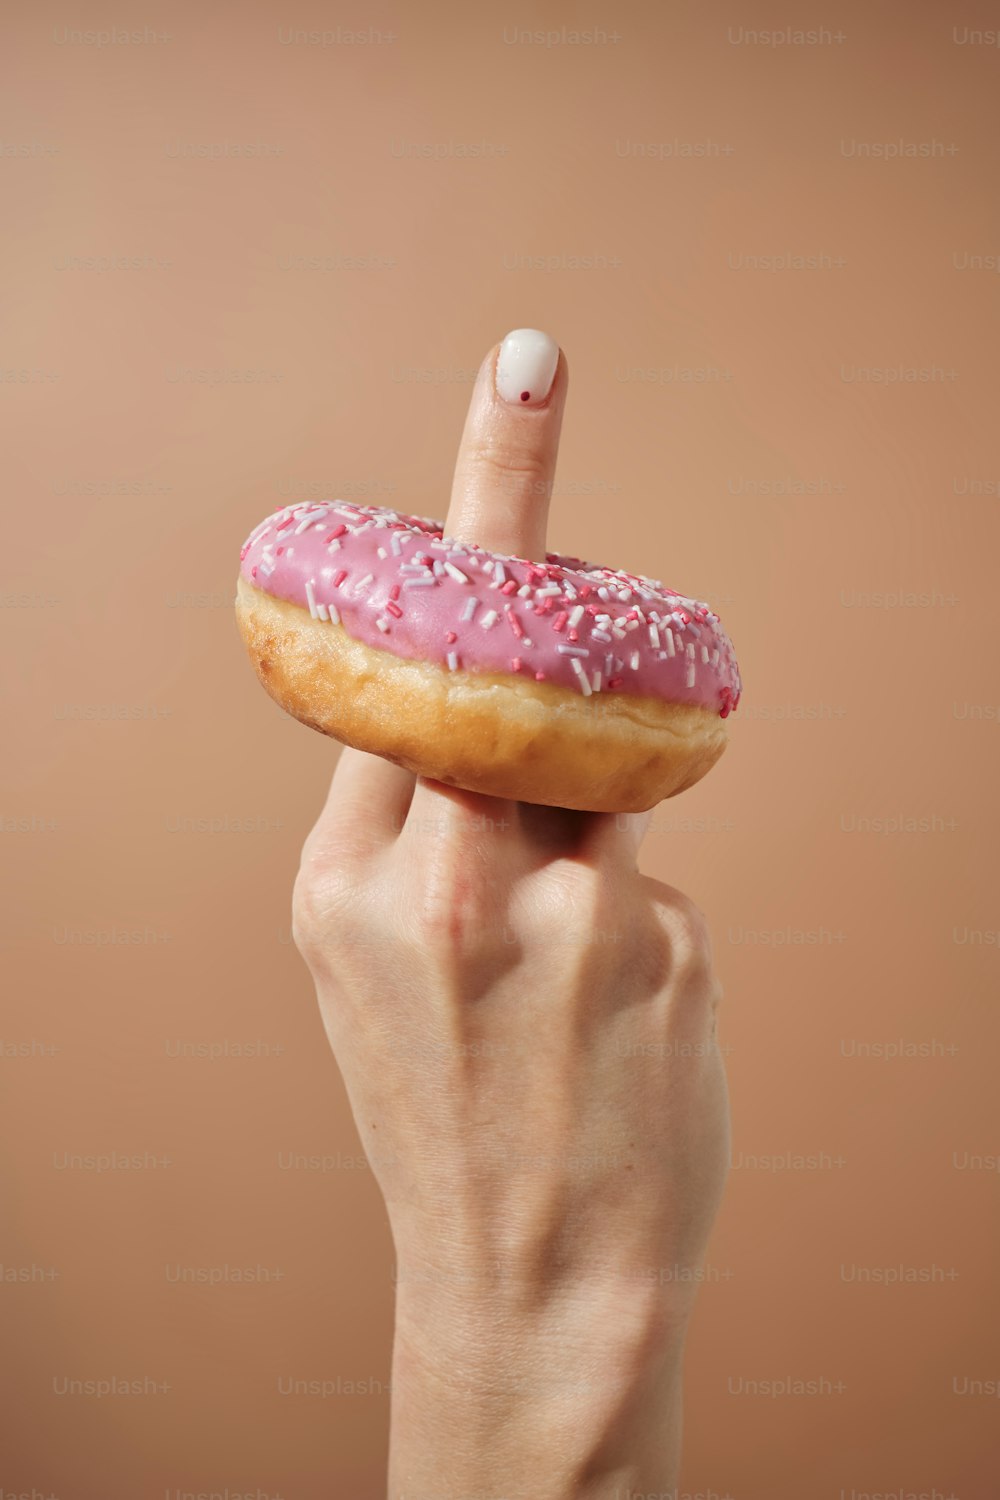 a hand holding a doughnut with pink icing and sprinkles